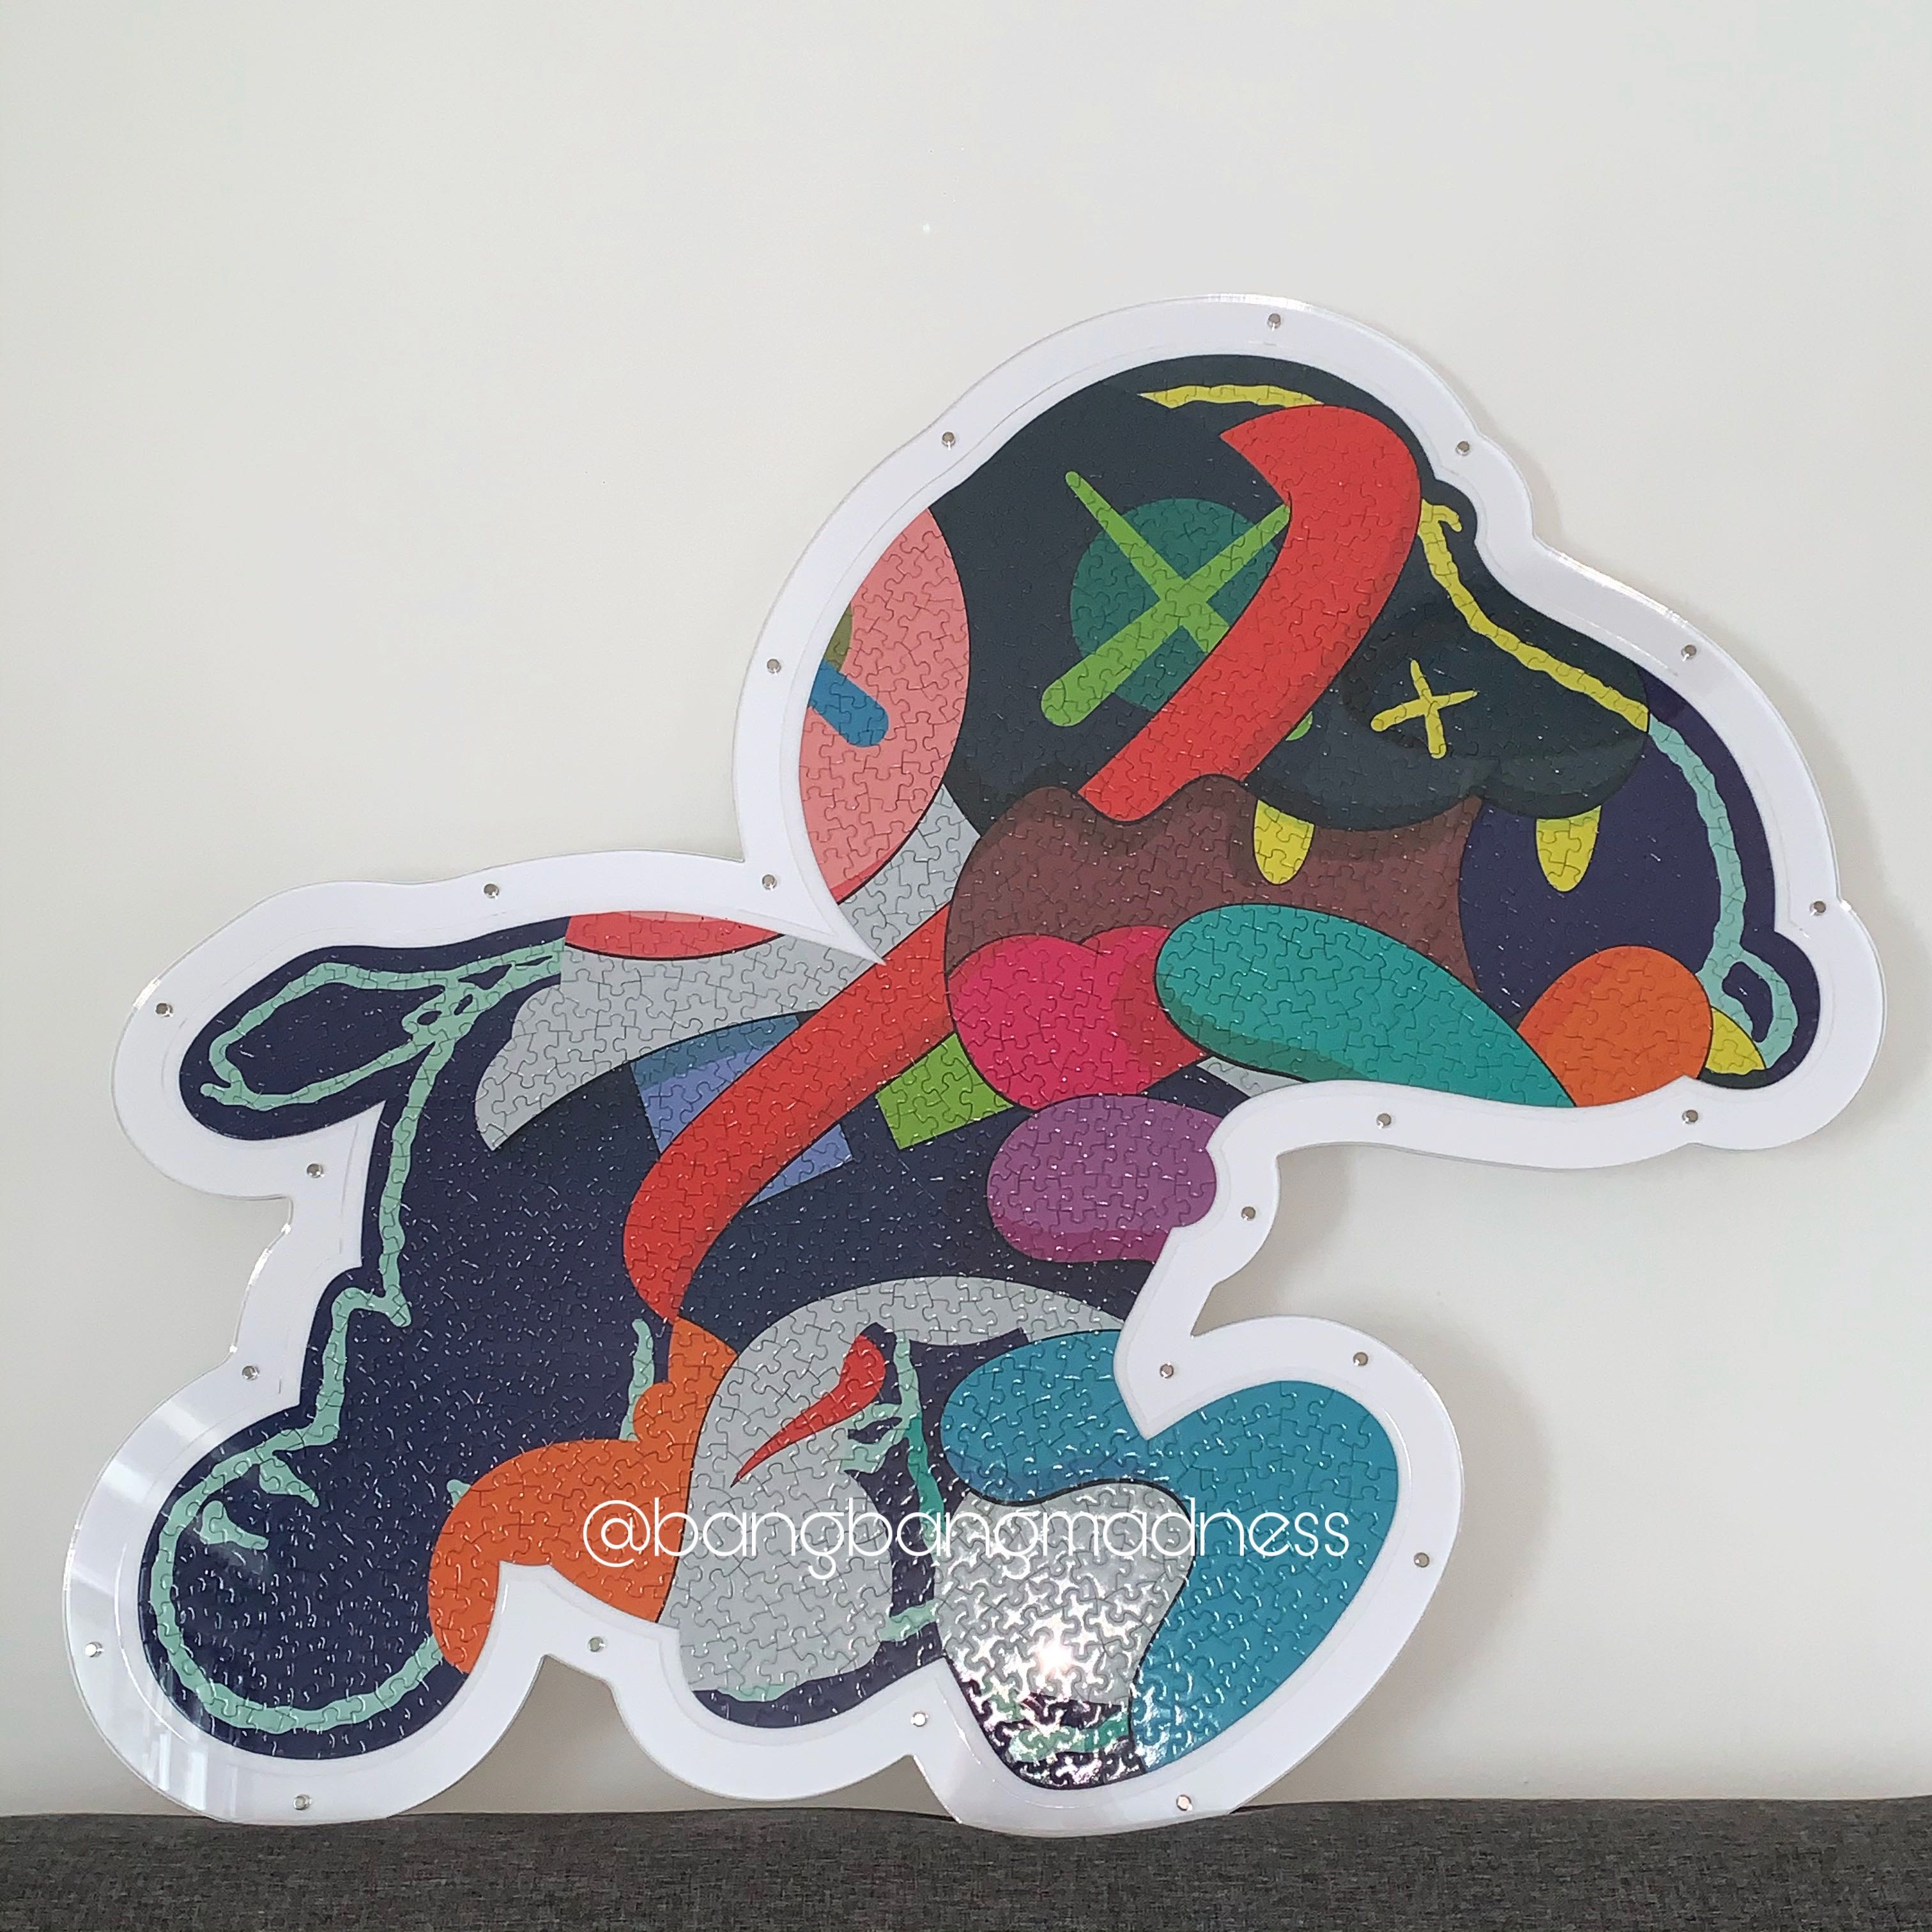 KAWS Stay Steady Puzzle Snoopy NGV EXCLUSIVE Jigsaw 1000 Piece *IN HAND*